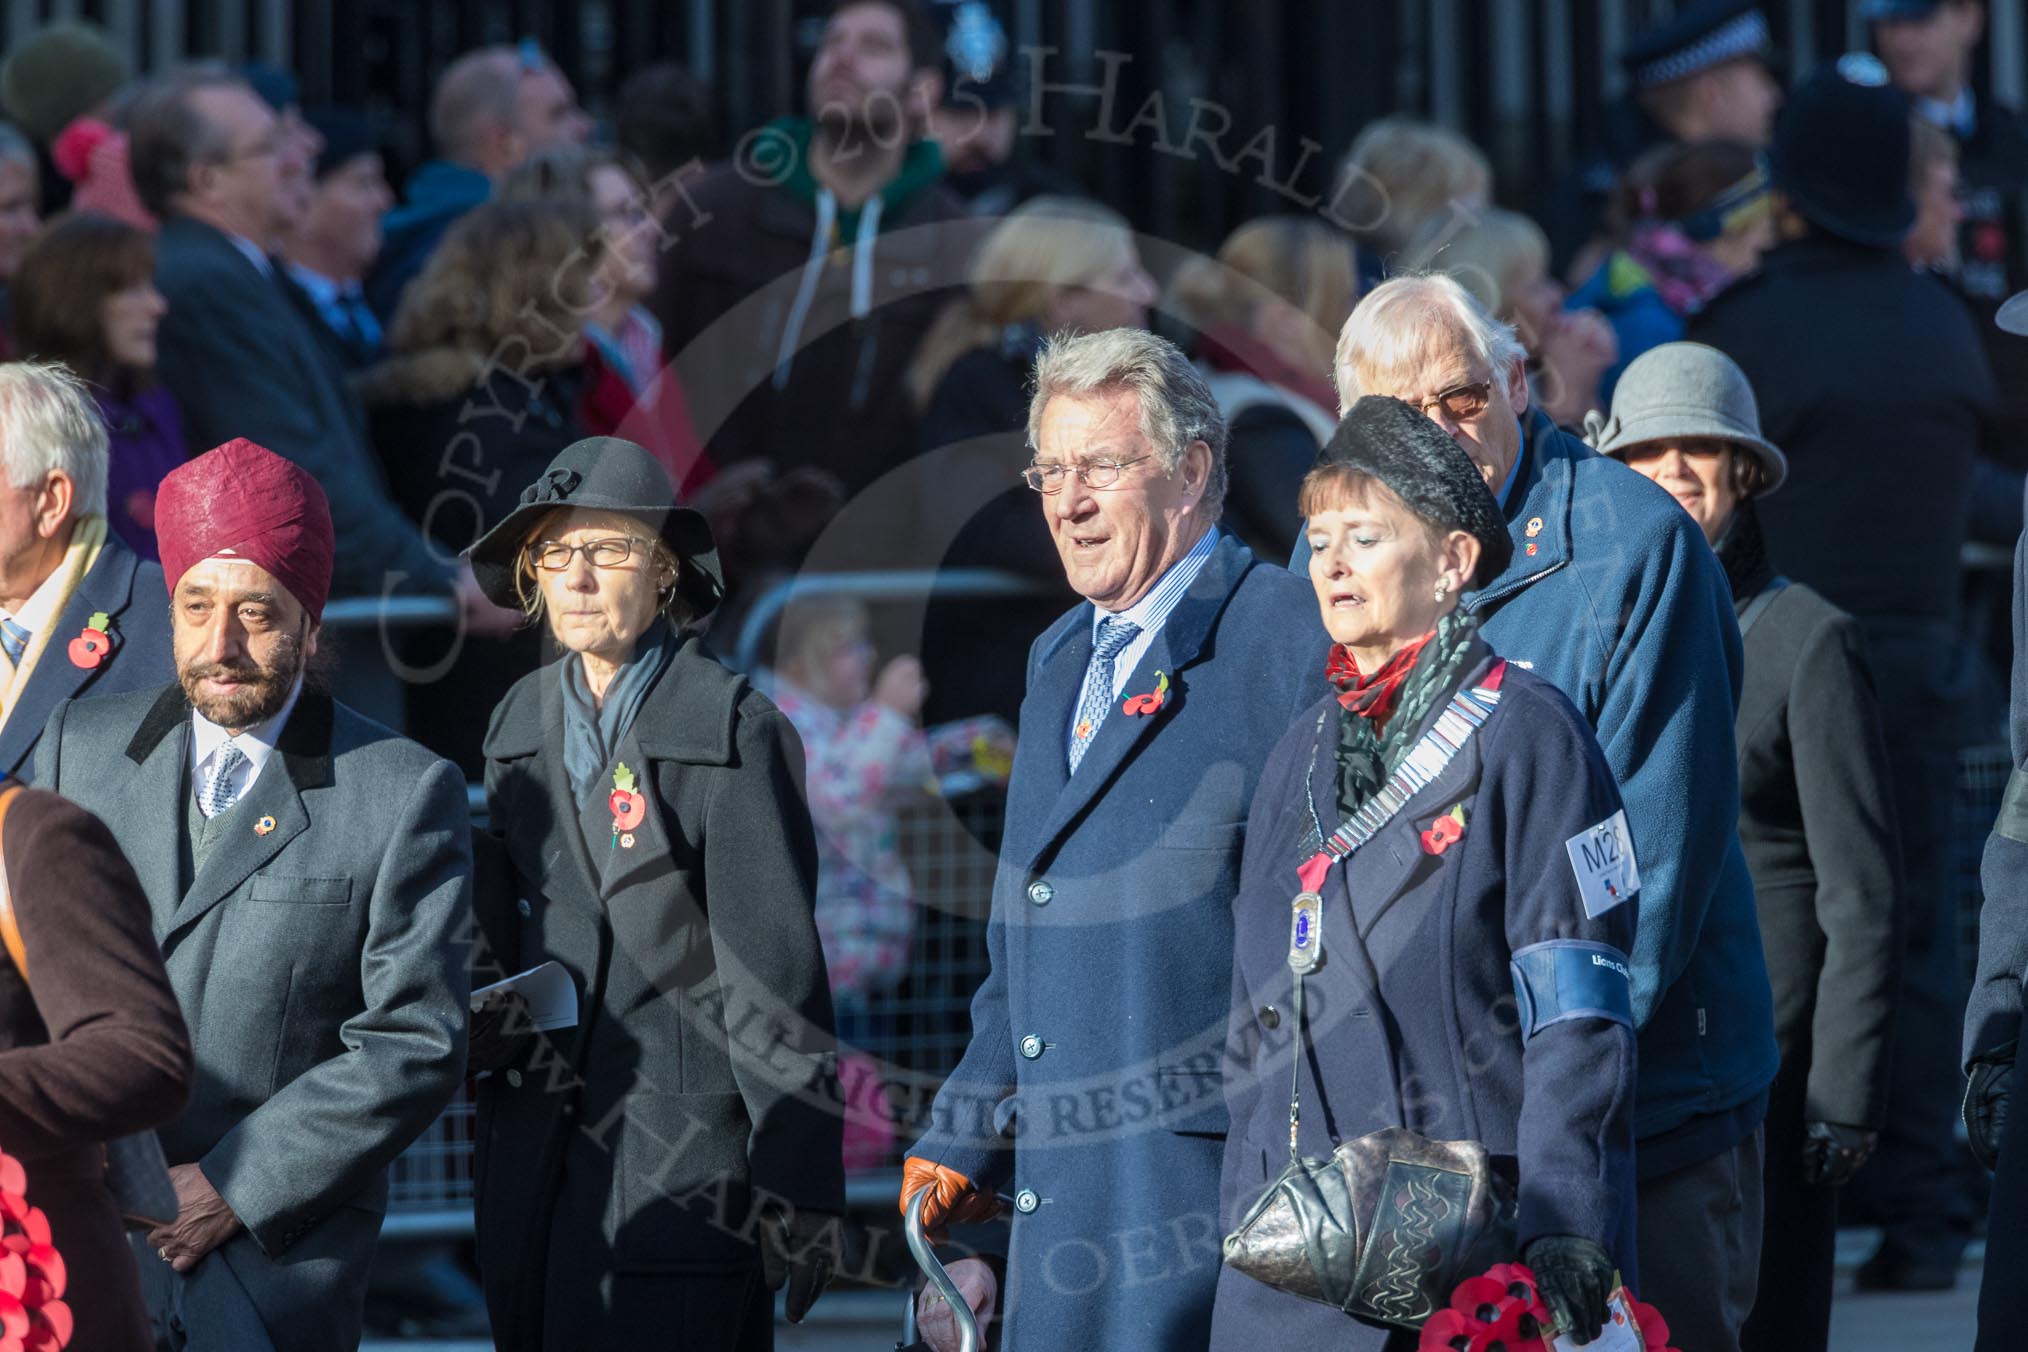 March Past, Remembrance Sunday at the Cenotaph 2016: M28 Lions Club International.
Cenotaph, Whitehall, London SW1,
London,
Greater London,
United Kingdom,
on 13 November 2016 at 13:17, image #2733